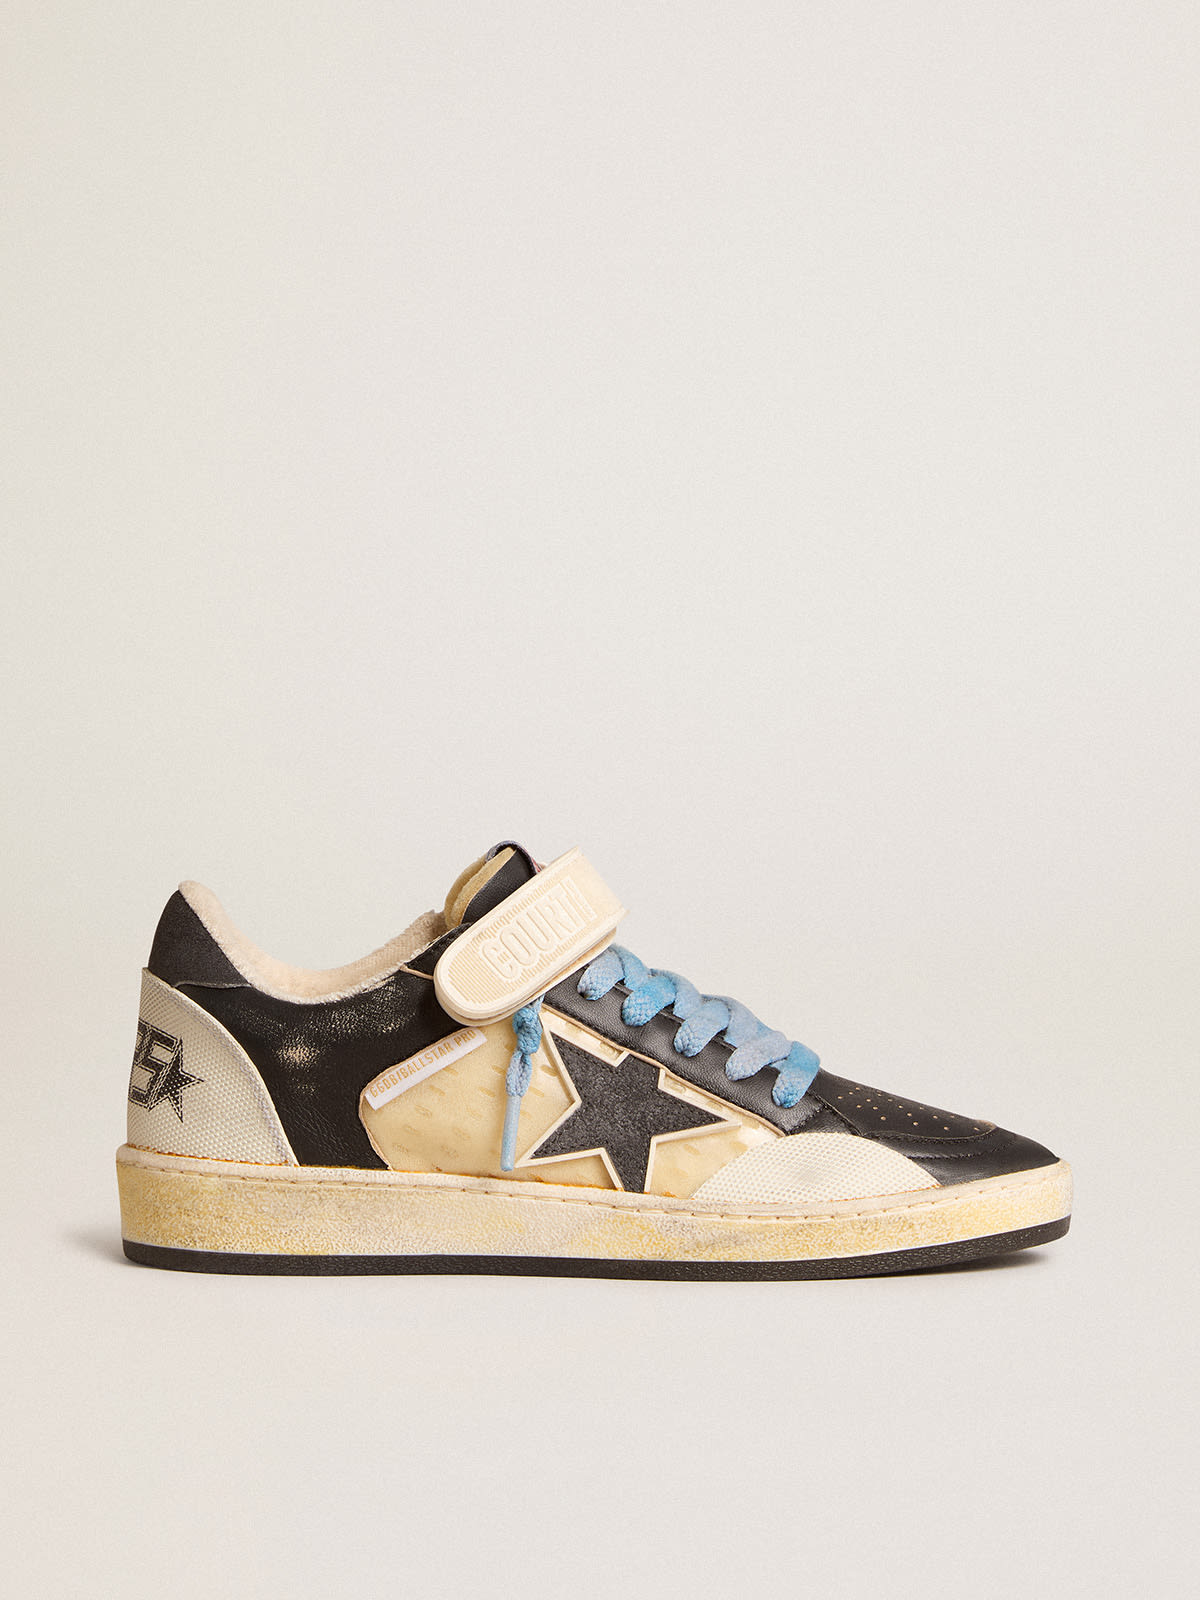 Golden Goose - Men’s Ball Star Pro in black leather with Velcro strap in 